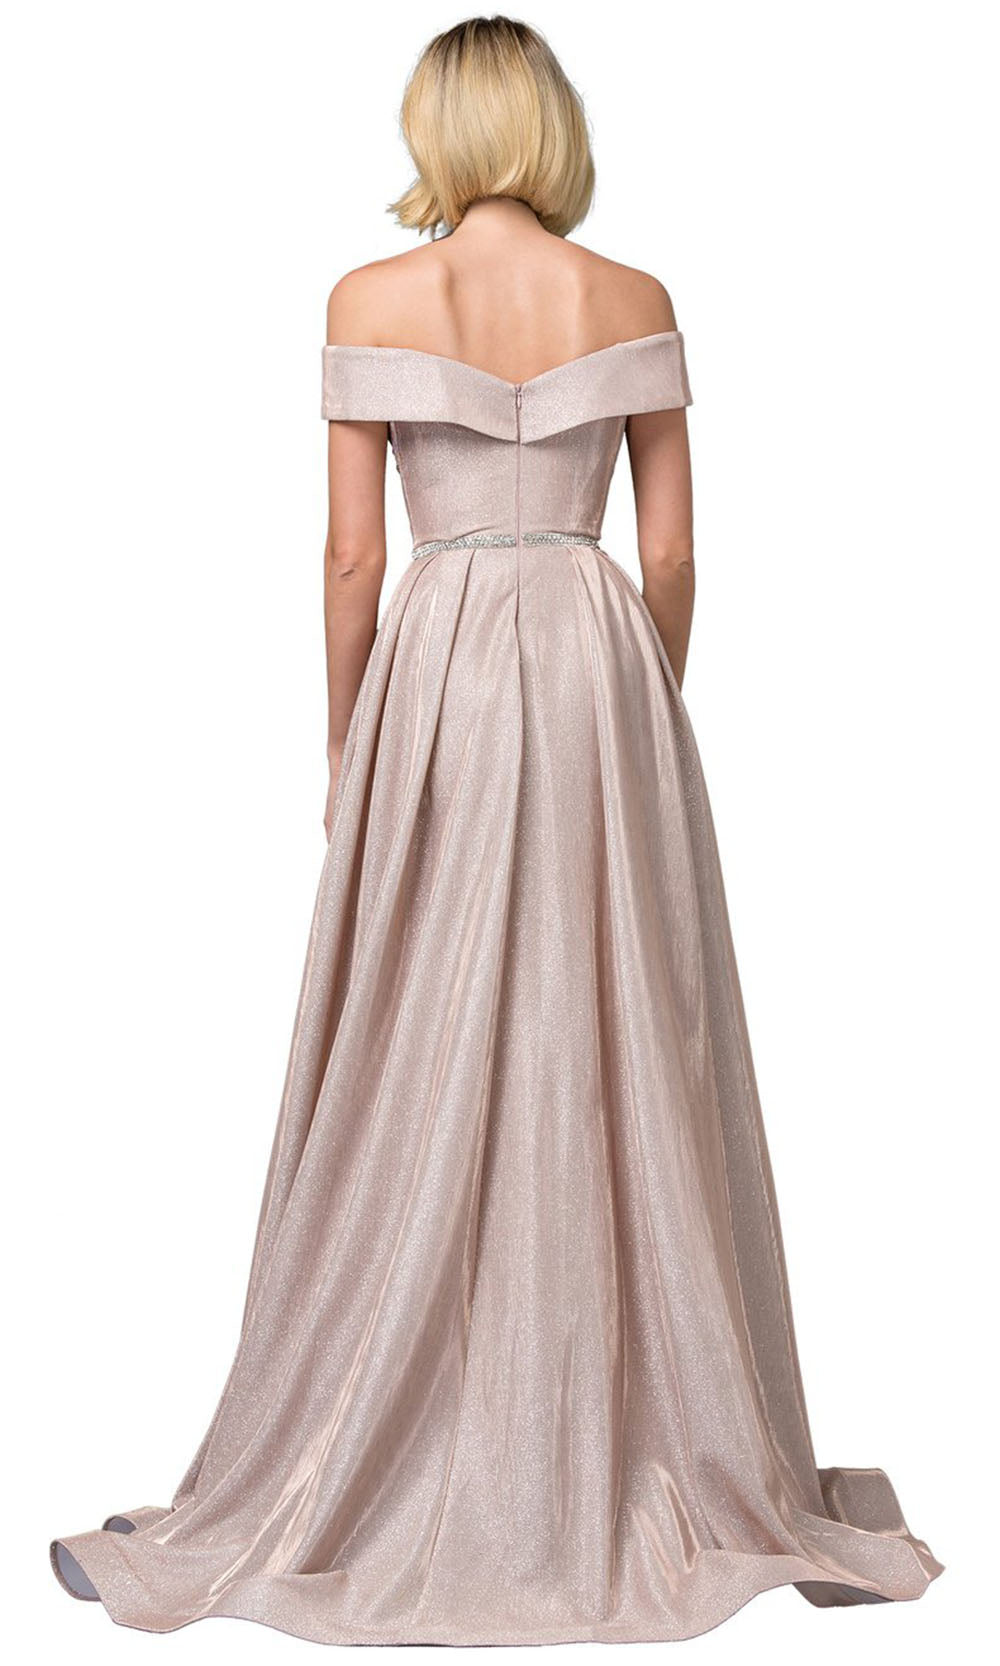 Dancing Queen - 2824 Off Shoulder Beaded Belt Shimmer A-Line Gown In Champagne & Gold